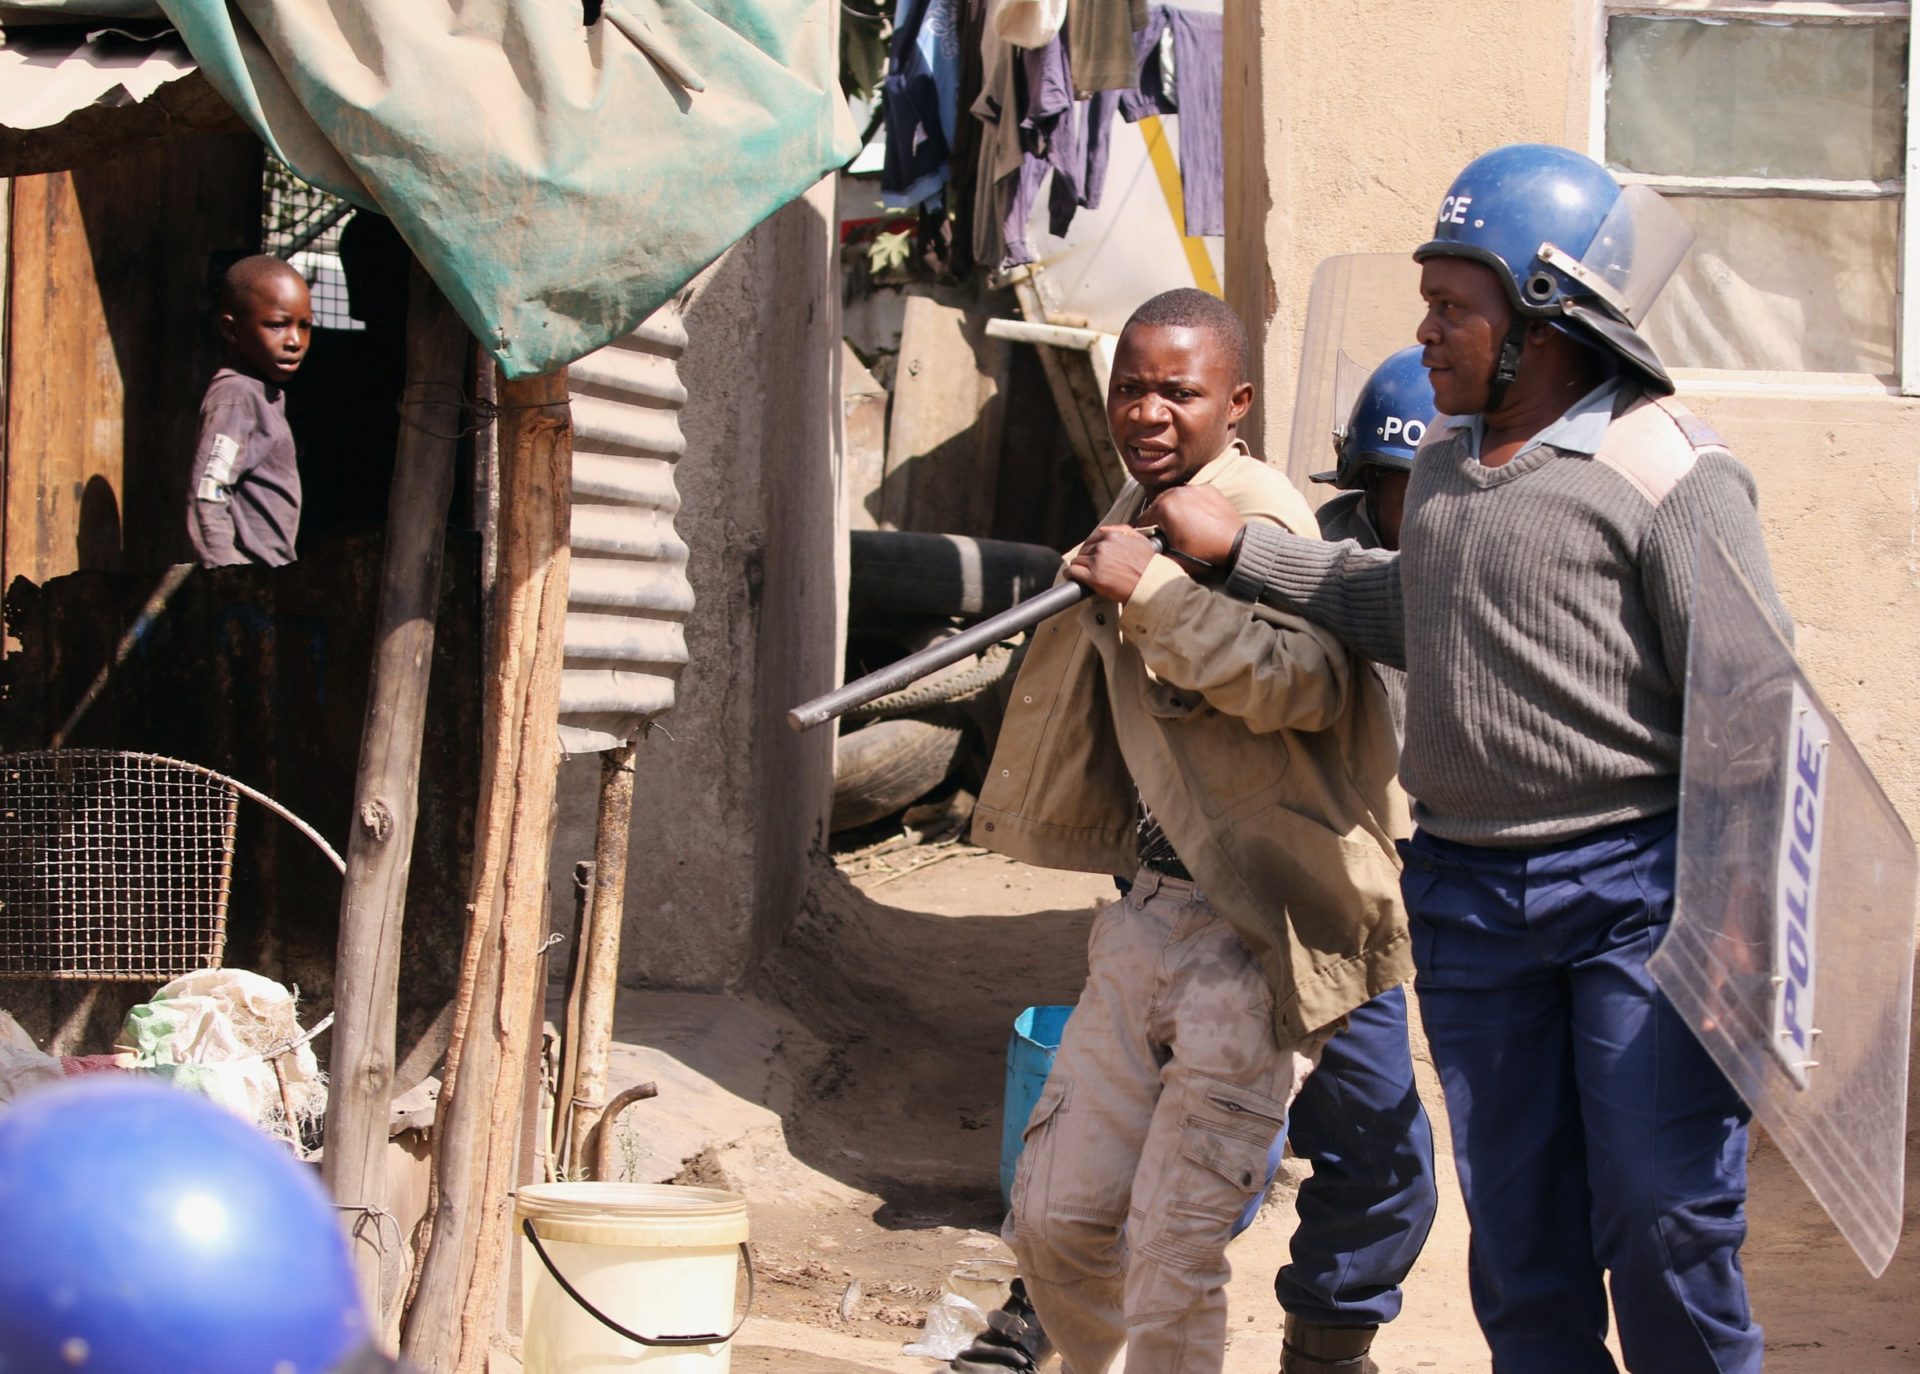 Riot police detain residents after a protest by taxi drivers turned violent on 4 July in Harare, Zimbabwe. The nation's church leaders called on the government to listen to the cries of its suffering citizens, warning that their grievances could soon explode into civil unrest if not addressed. Photo: CNS/Philimon Bulawayo, Reuters